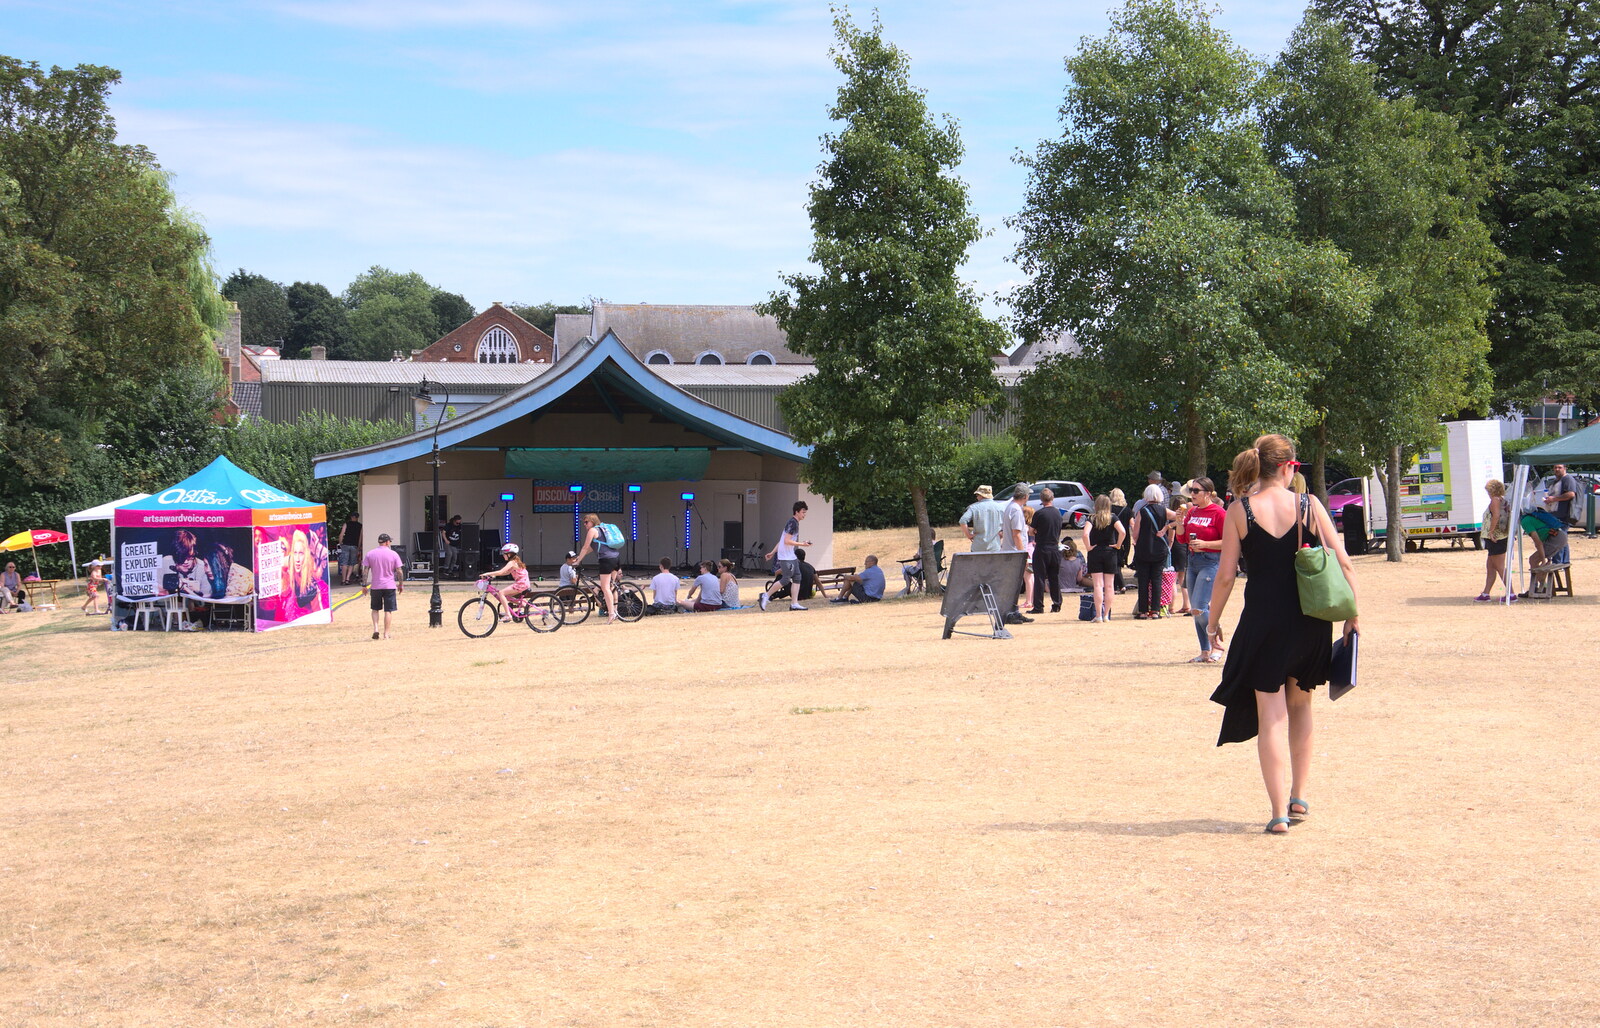 The grass is parched by the pavillion from Diss Fest, The Park, Diss, Norfolk - 22nd July 2018